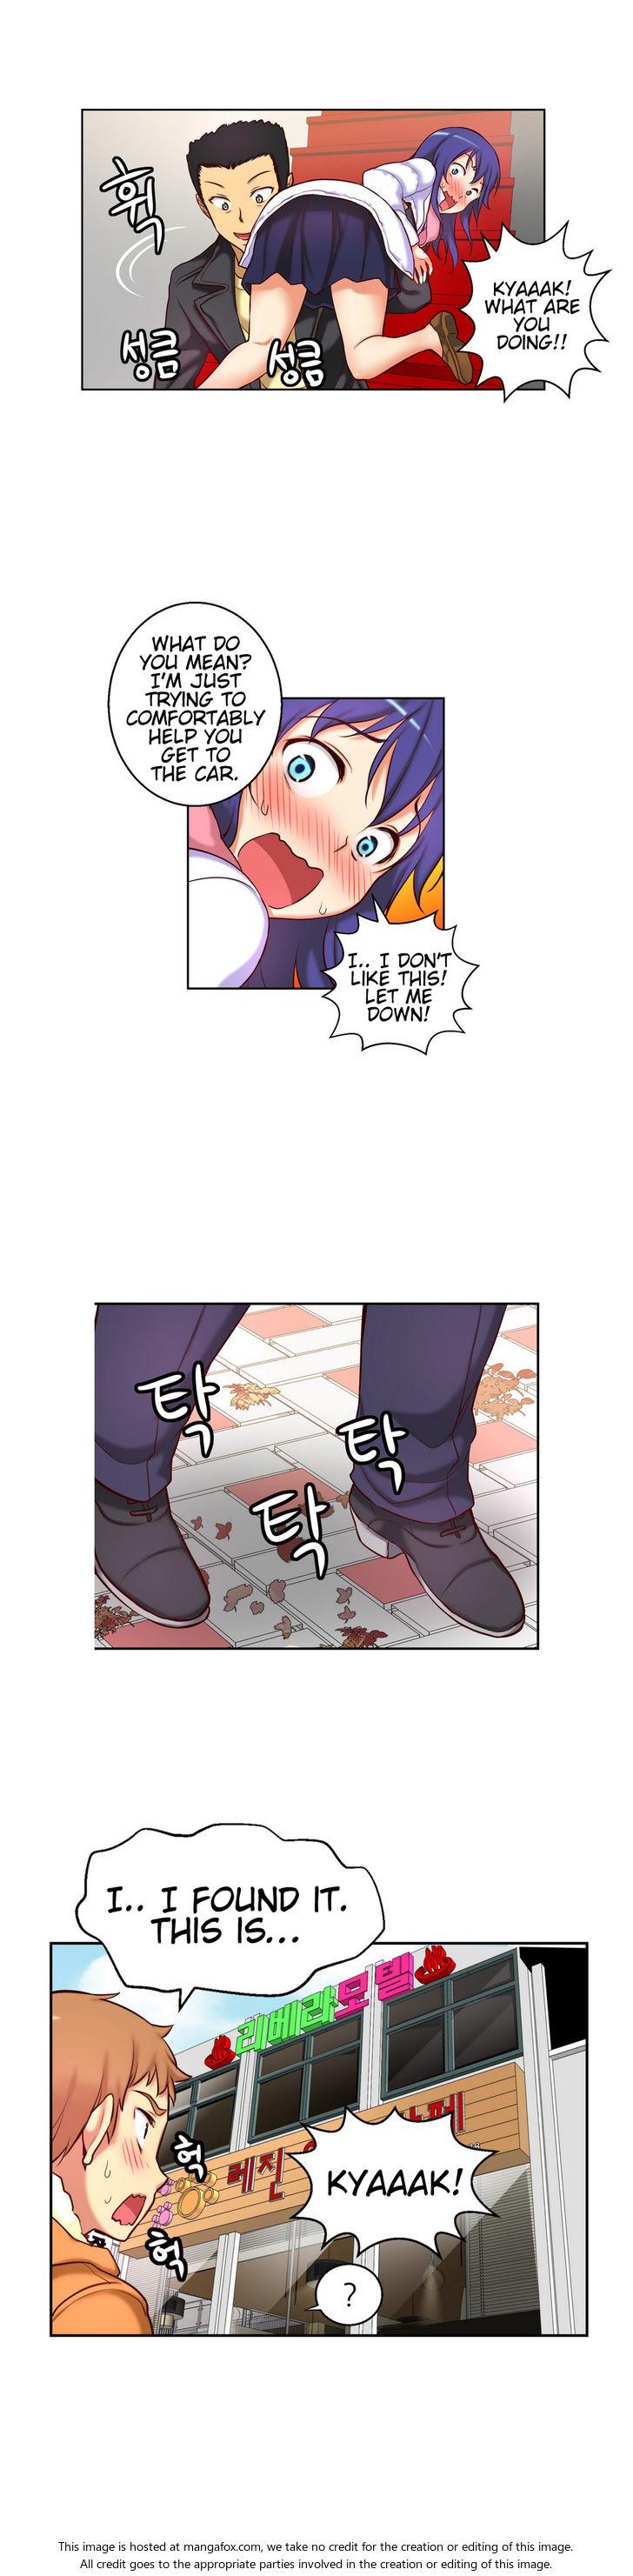 [Donggul Gom] She is Young (English) Part 1/2 564